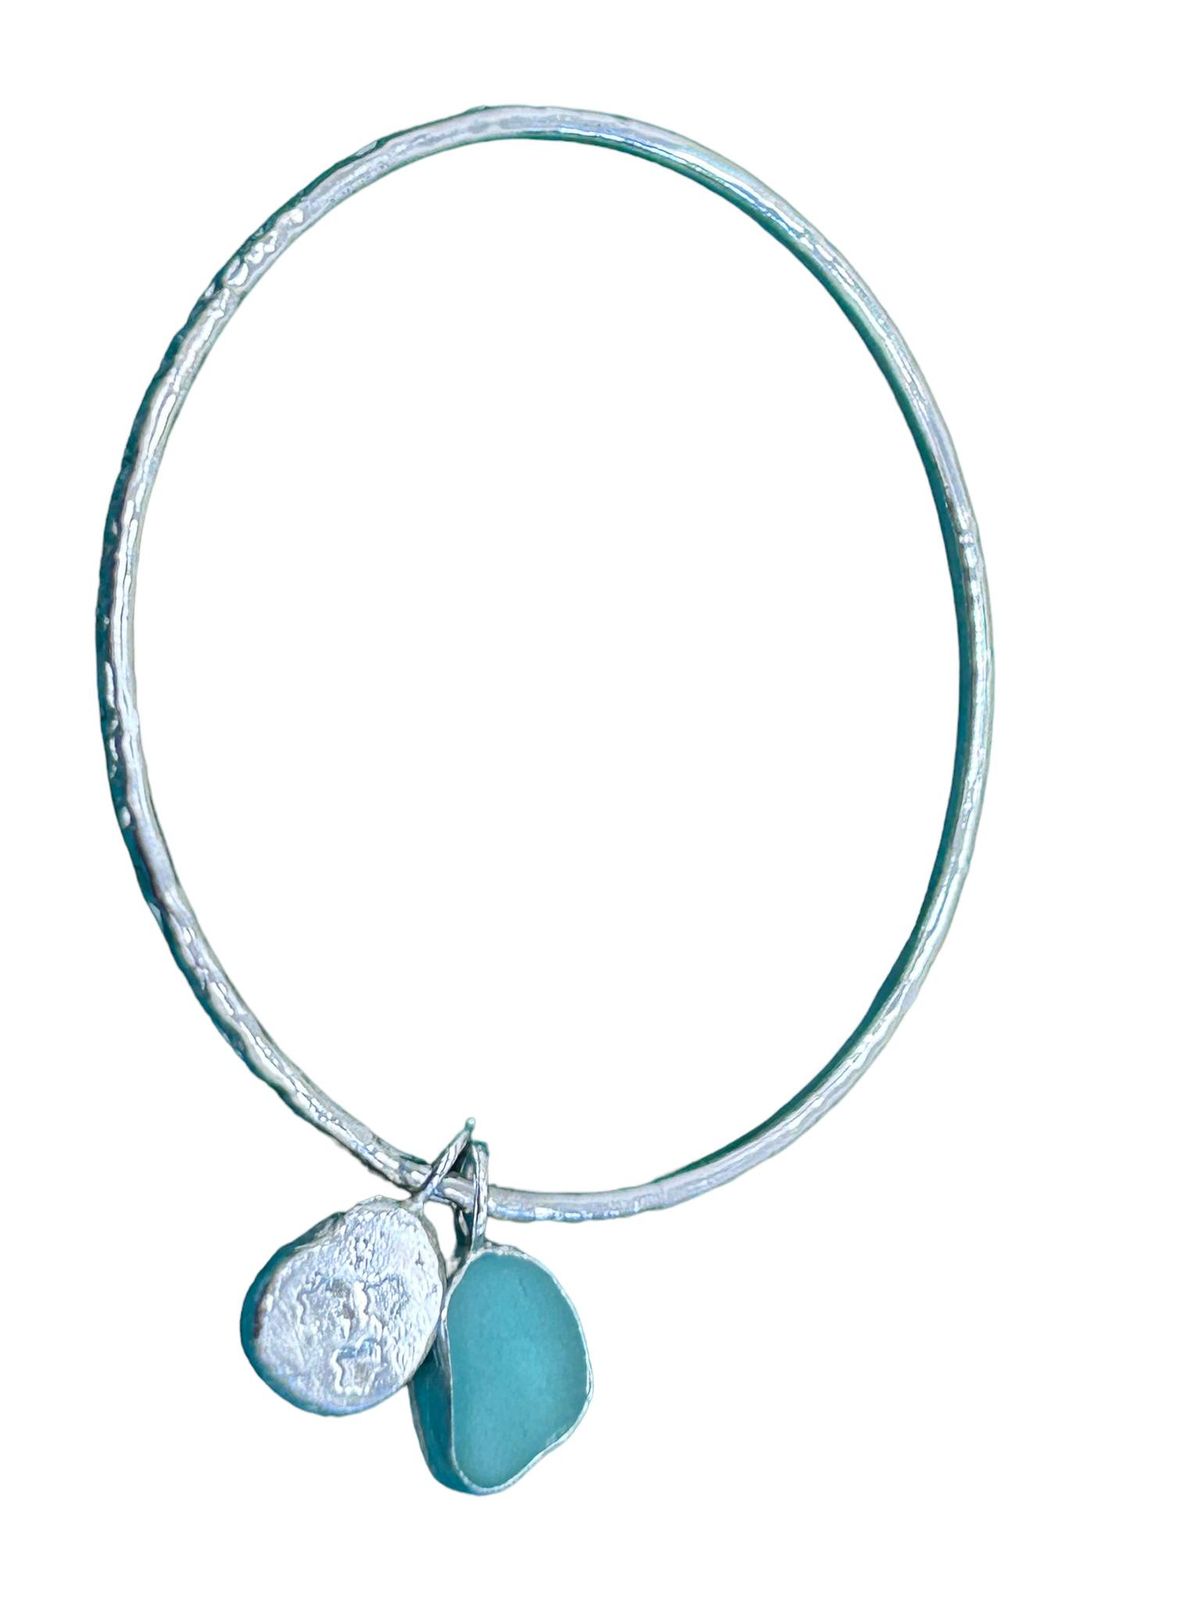 1 day course in silver jewellery * Bangle with sea-glass and silver clay pendant or earrings